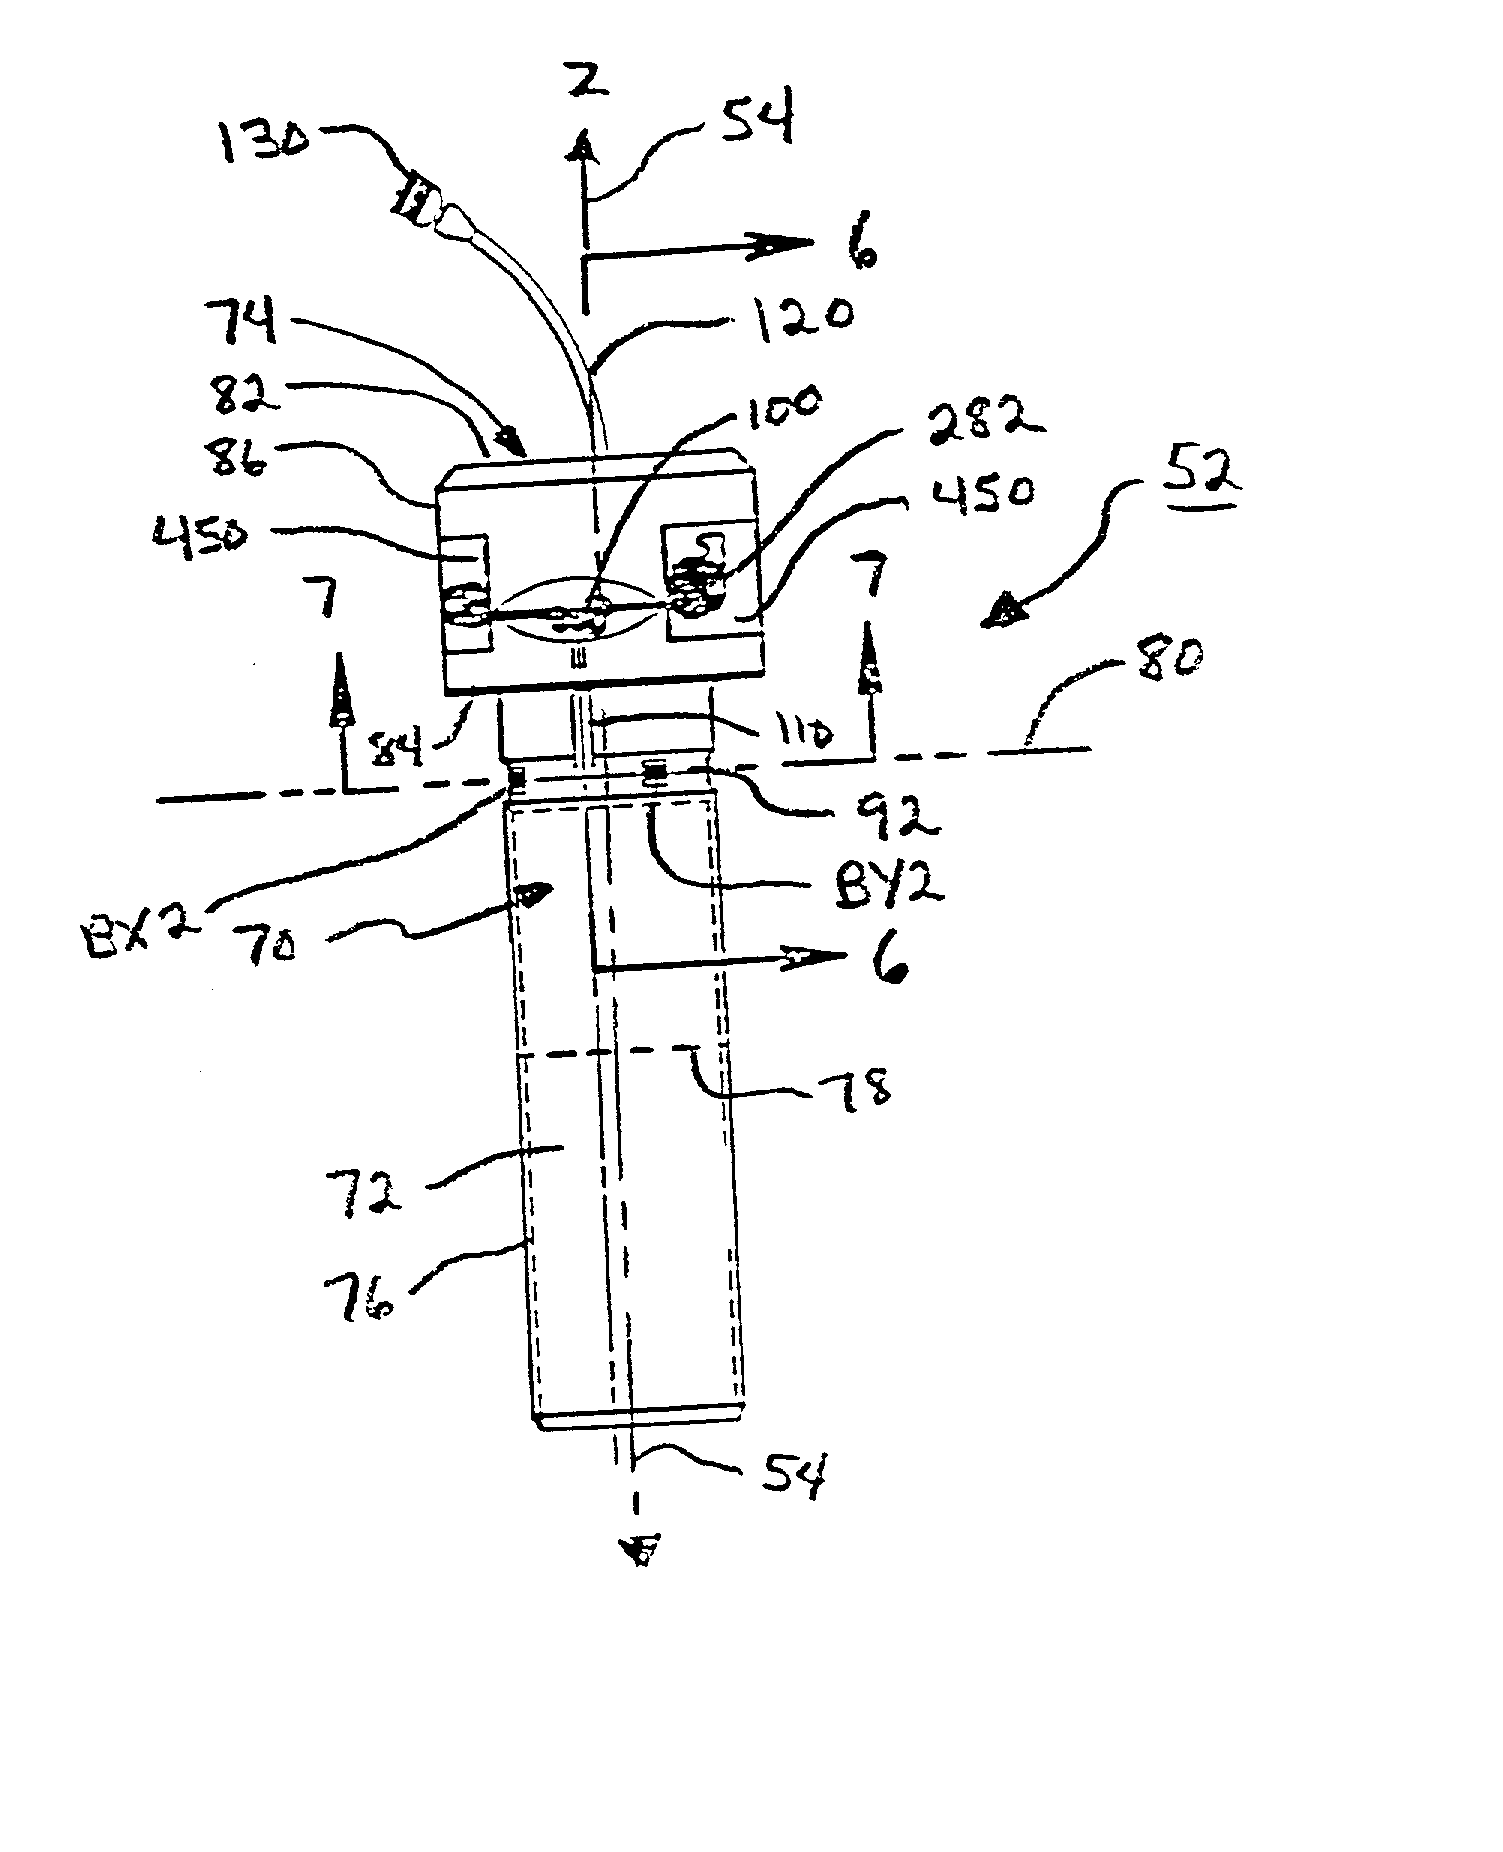 System and method for measuring bending in a pin member